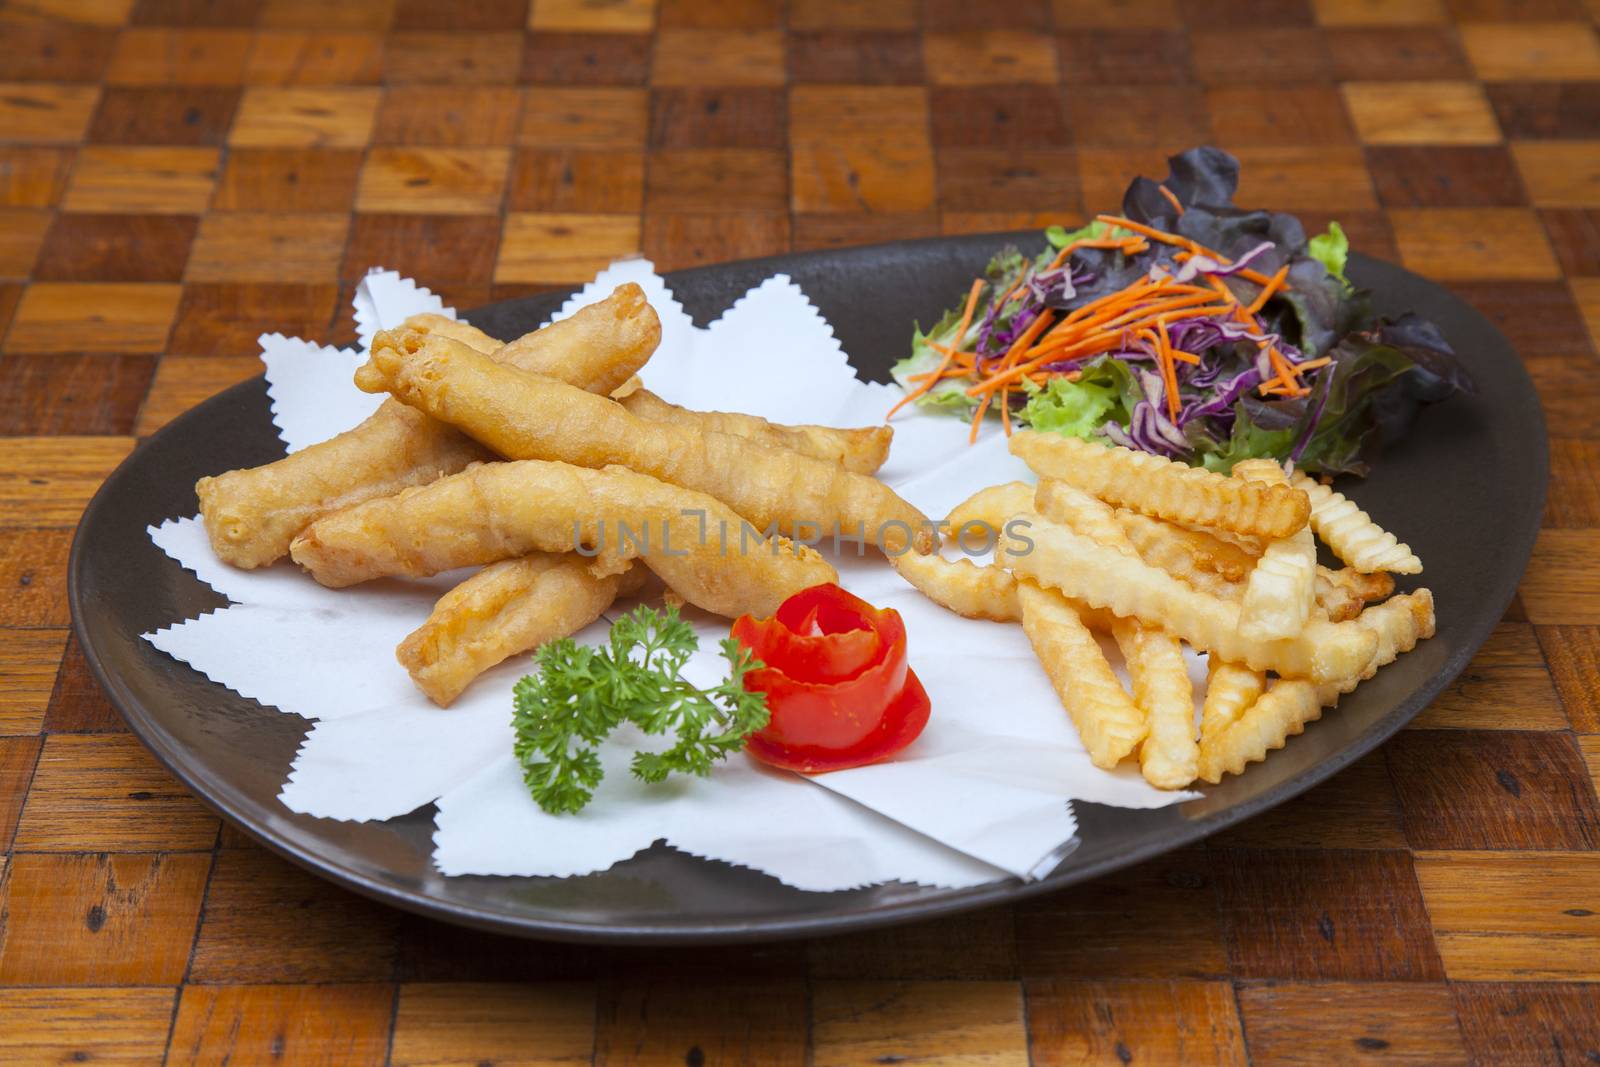  Mahi fish and chips with French fries  by jee1999